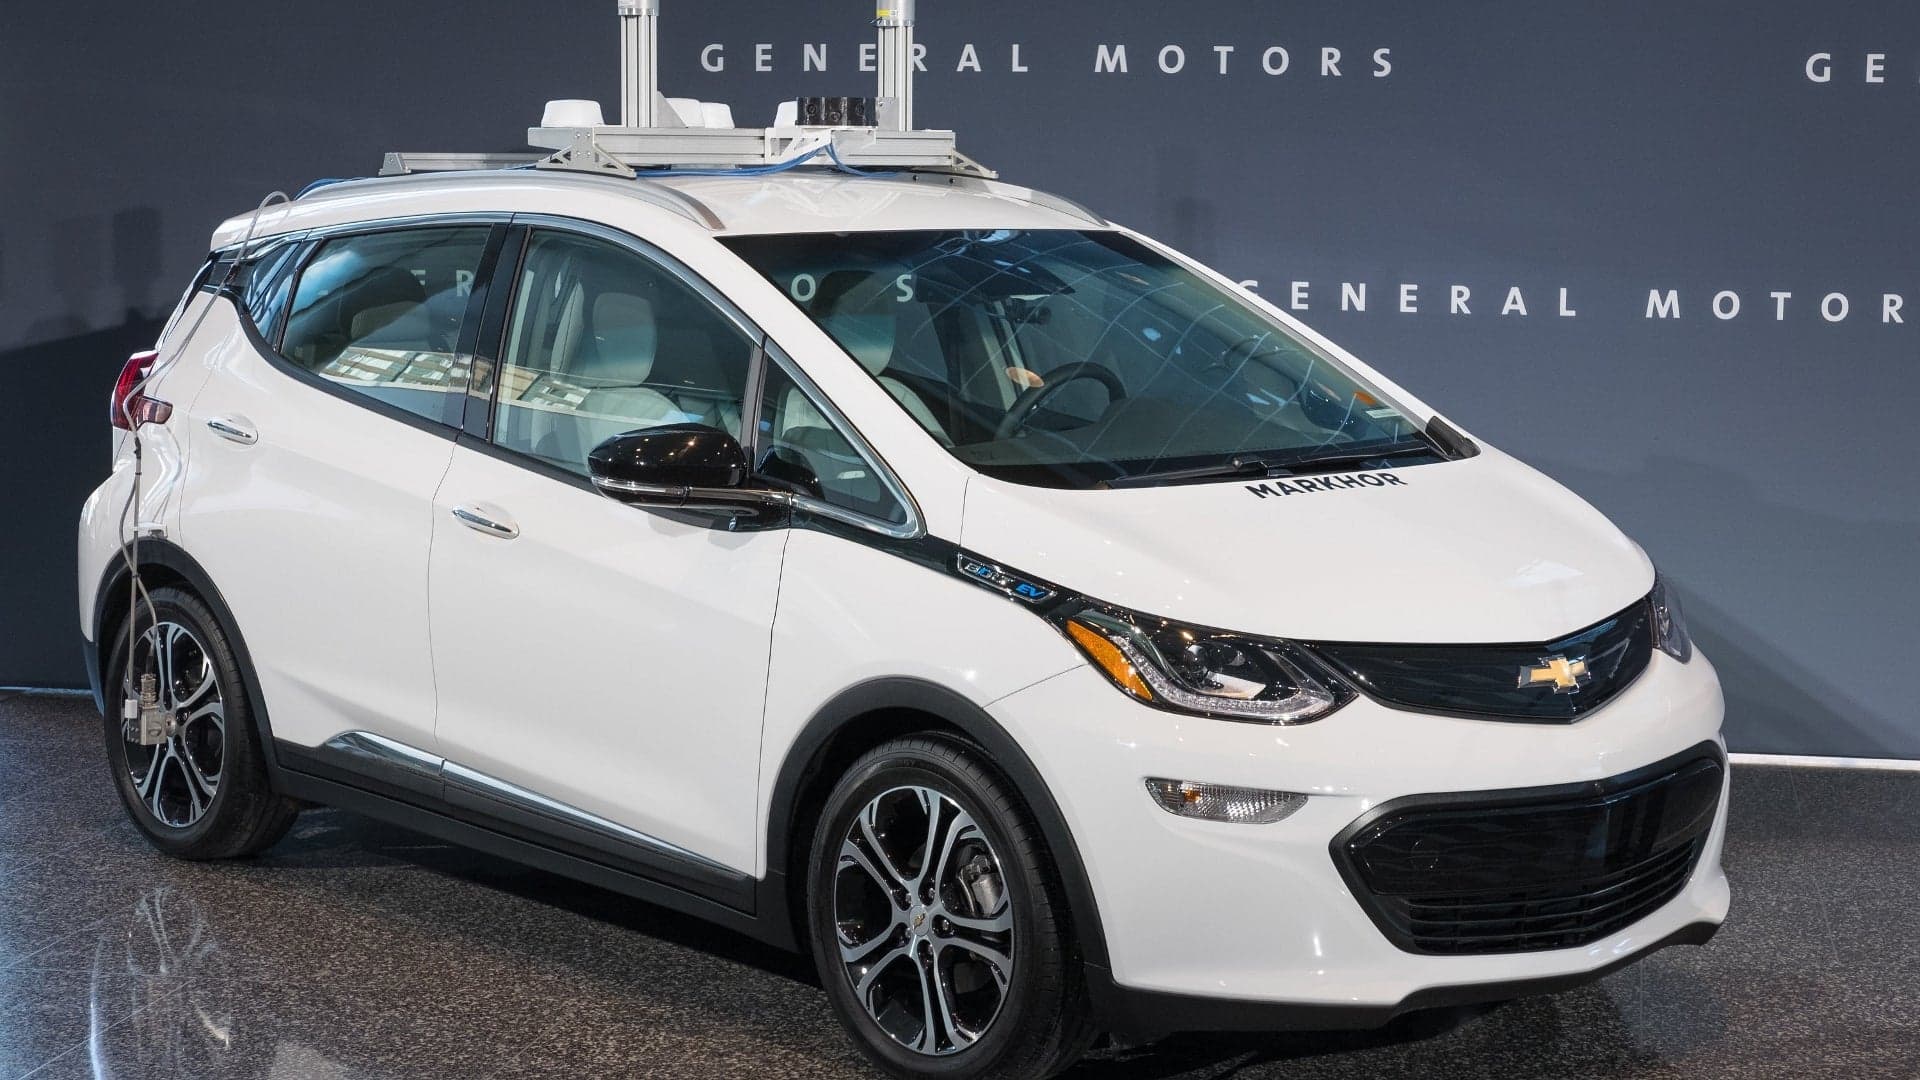 GM Self-Driving Cars Involved in 6 Accidents in California Last Month